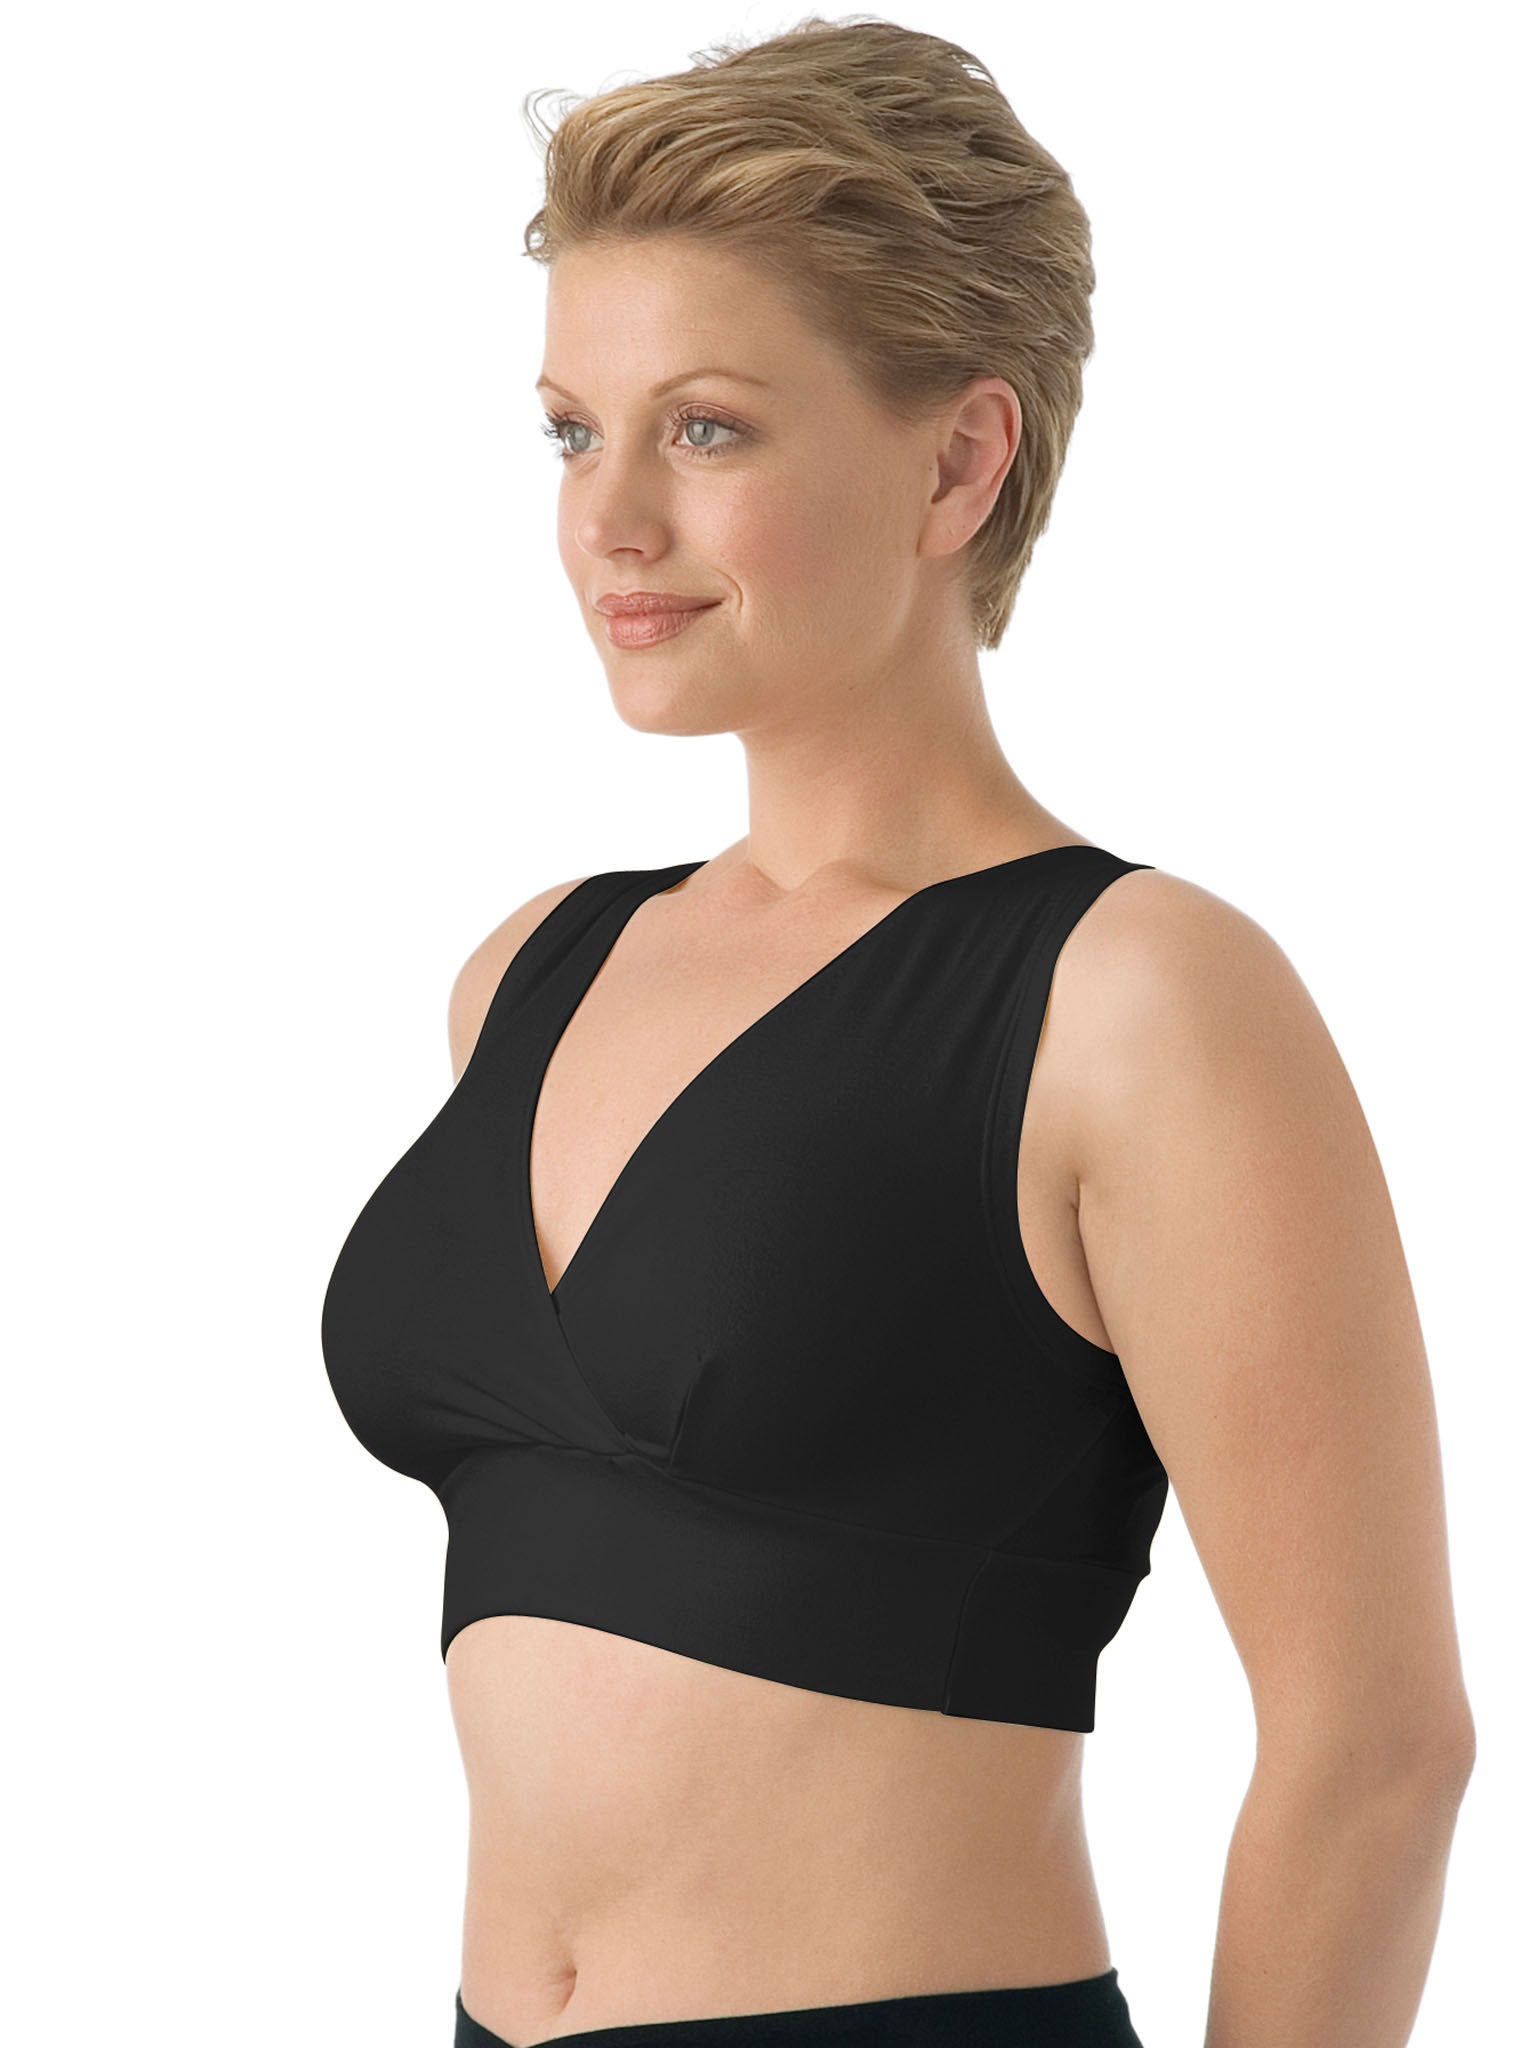 Blue Canoe Organic Cotton Light Support Bra in Full Cup Size